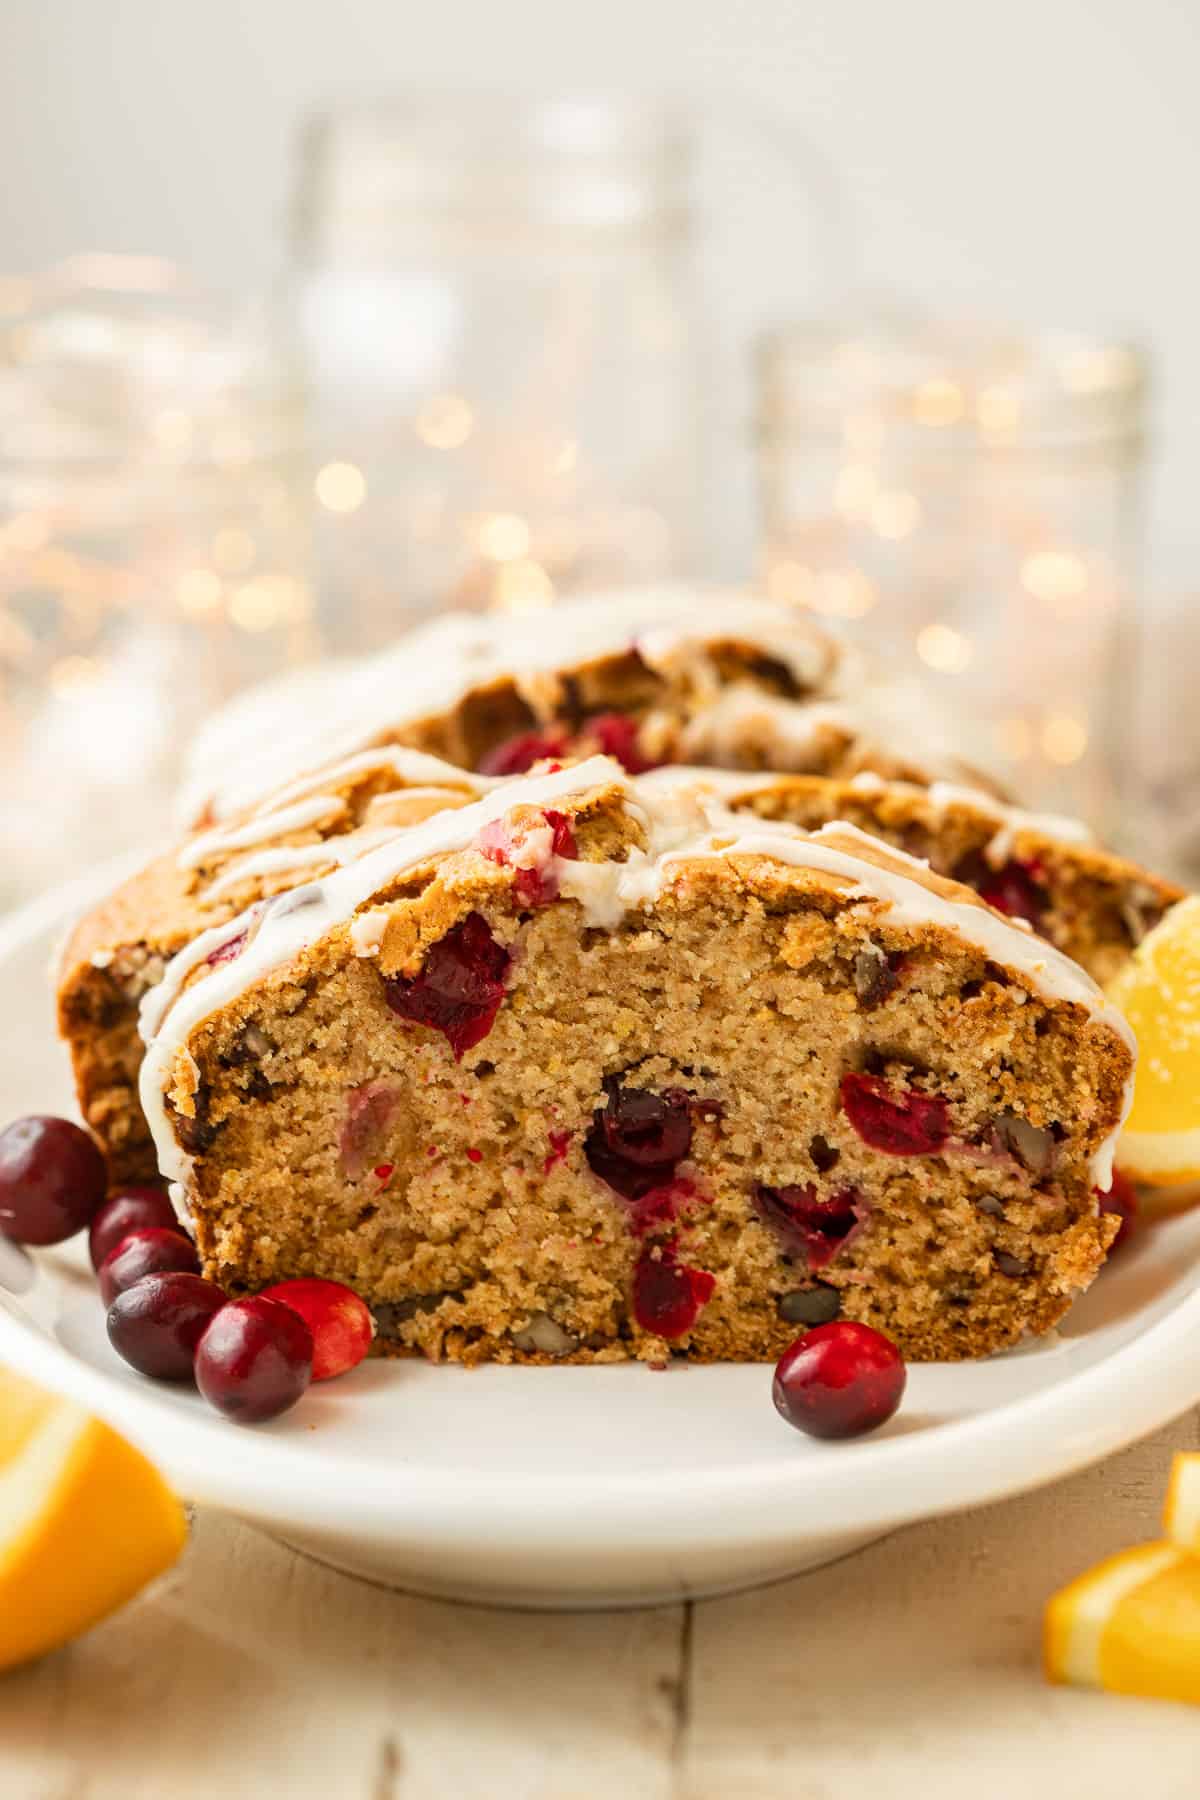 Sliced loaf of Vegan Cranberry Bread on a dish with twinkle lights in the background.